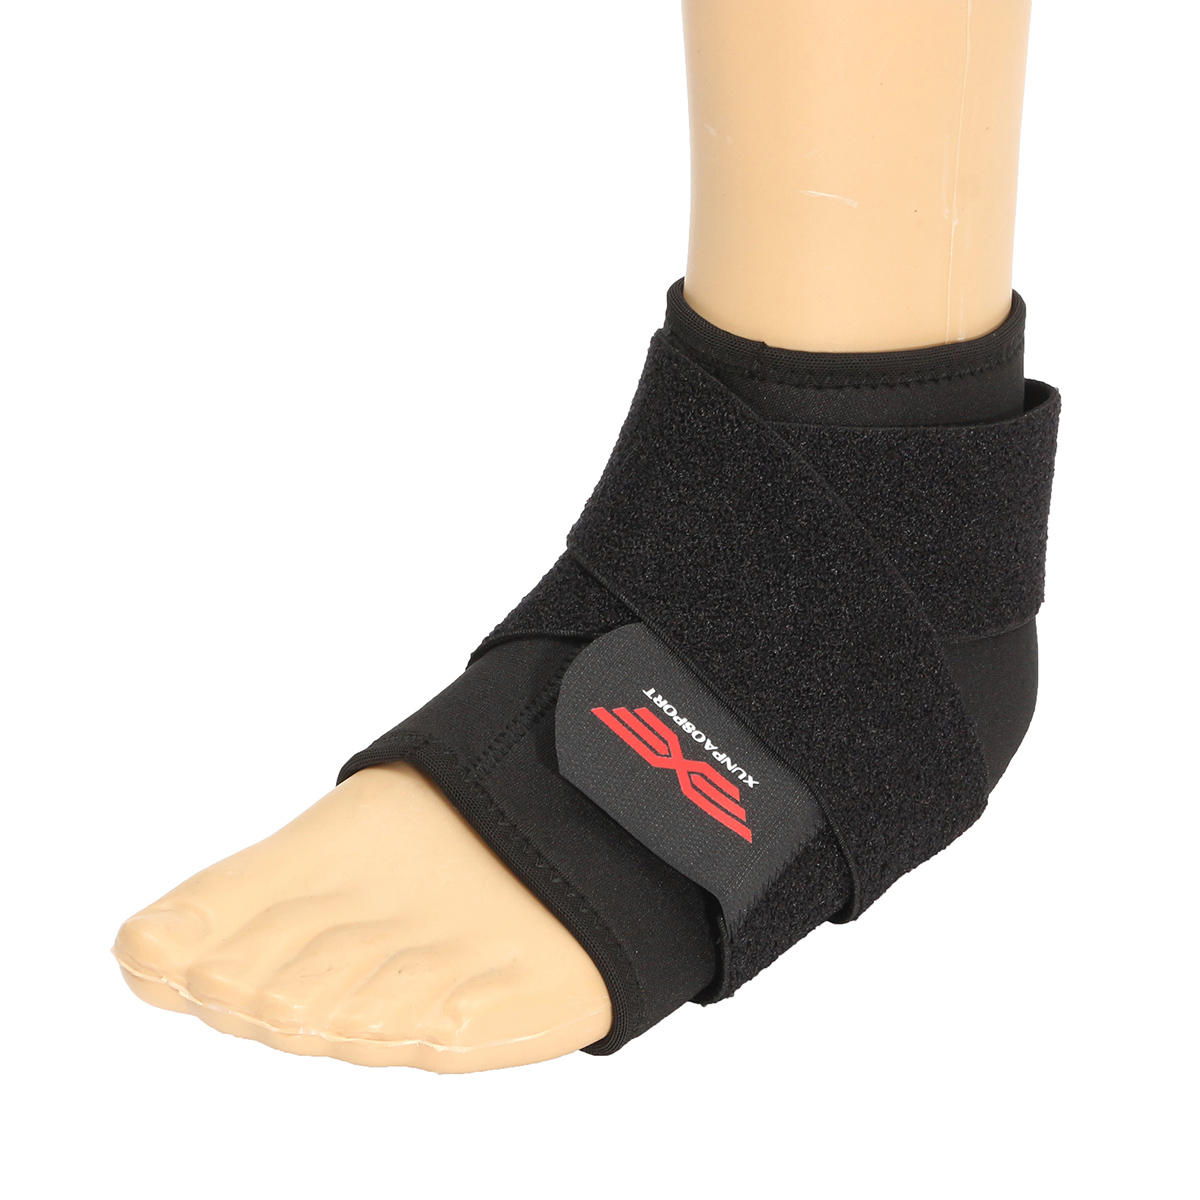 Adjustable-Rubber-Ankle-Support-Sport-Brace-Wrap-Strap-Foot-Sprain-Injury-Pain-Relief-1116524